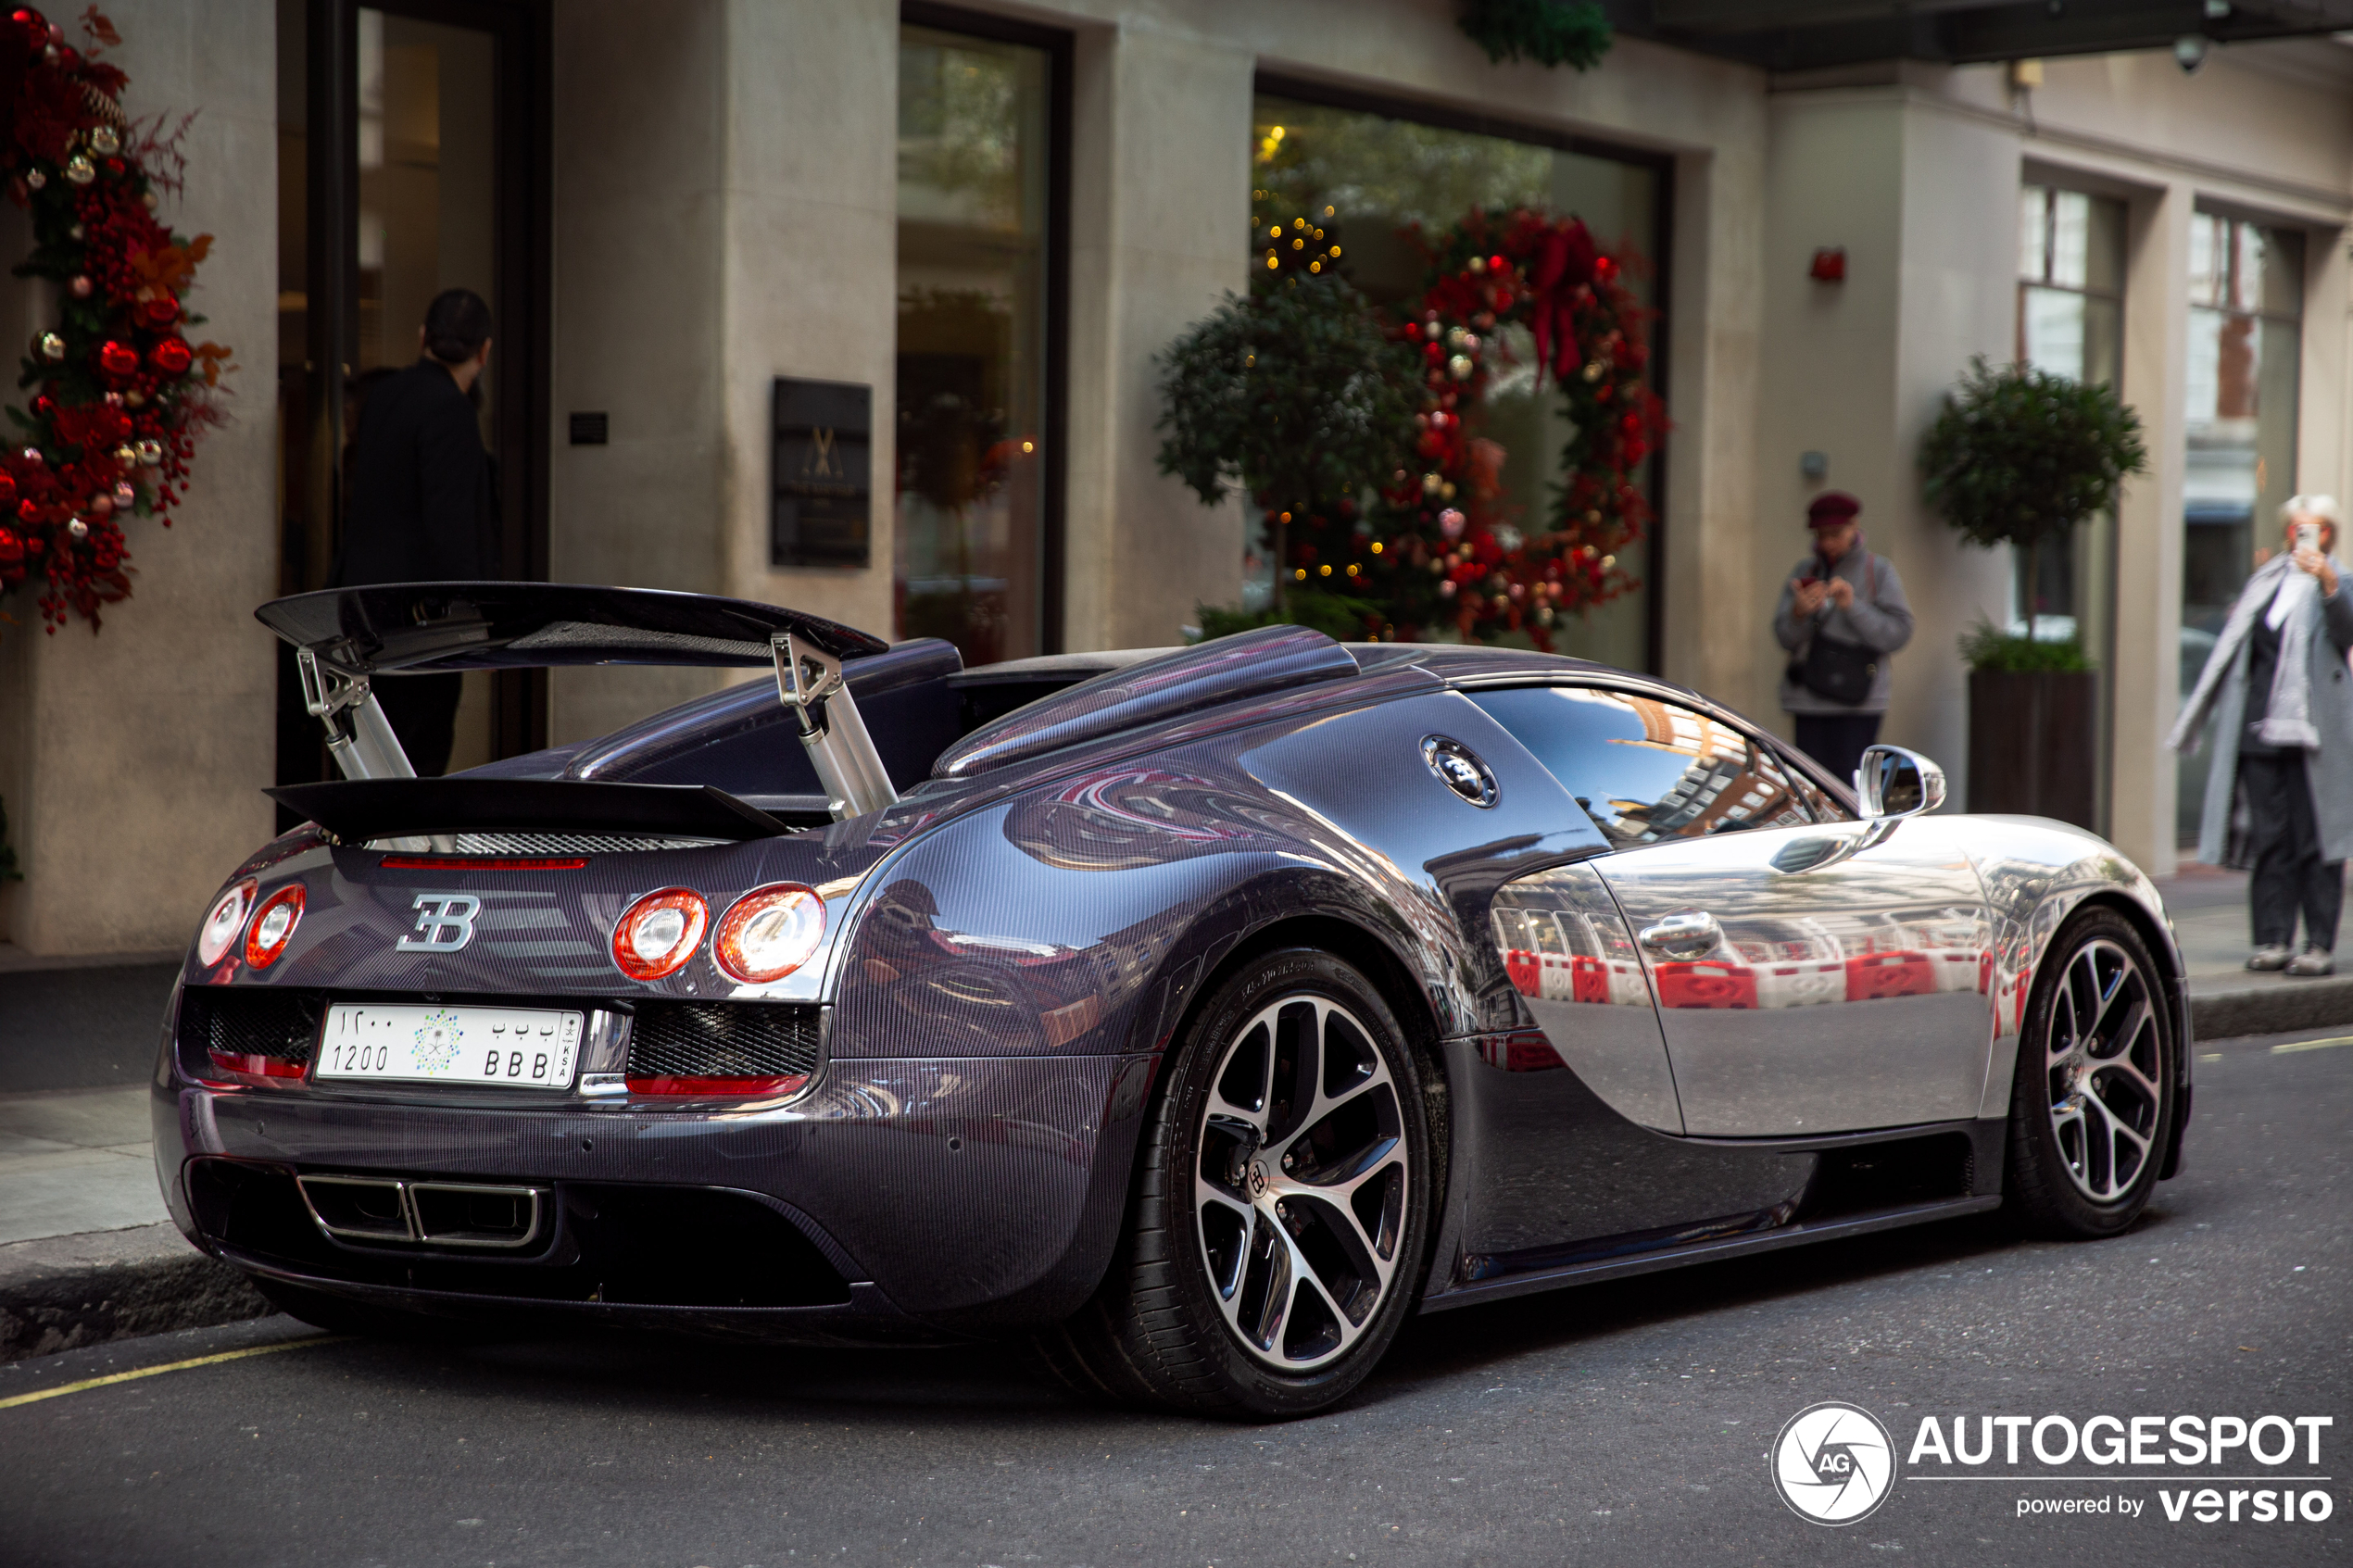 For the first time, we can now see this Veyron in London.